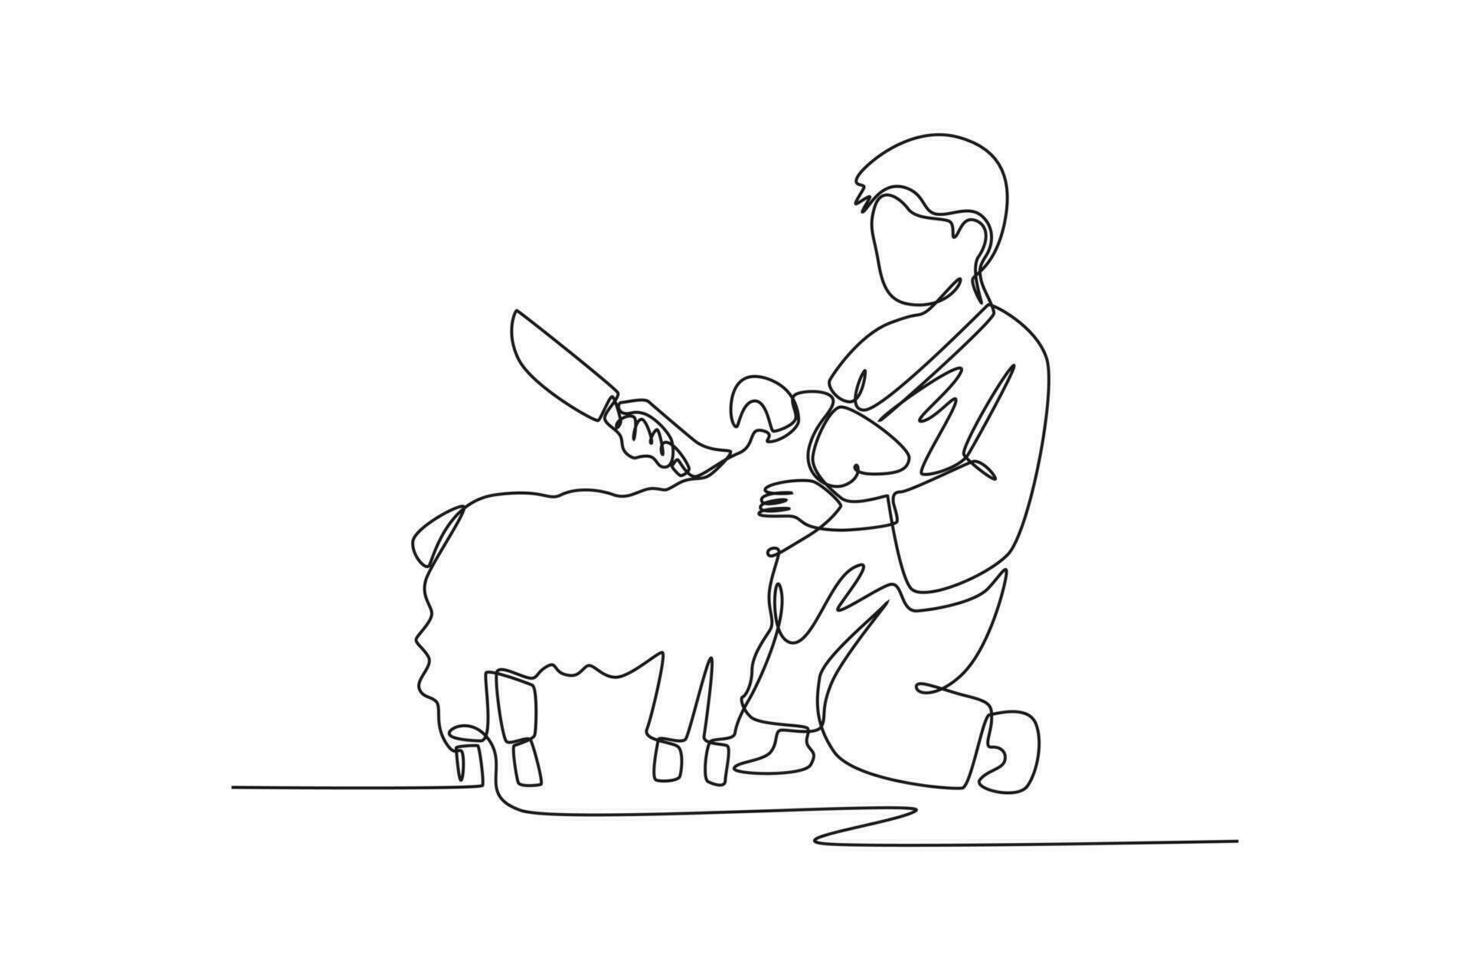 Continuous one line drawing a A Muslim with his Ihram dress slaughter sheep. Hajj and umrah concept. Single line draw design vector graphic illustration.